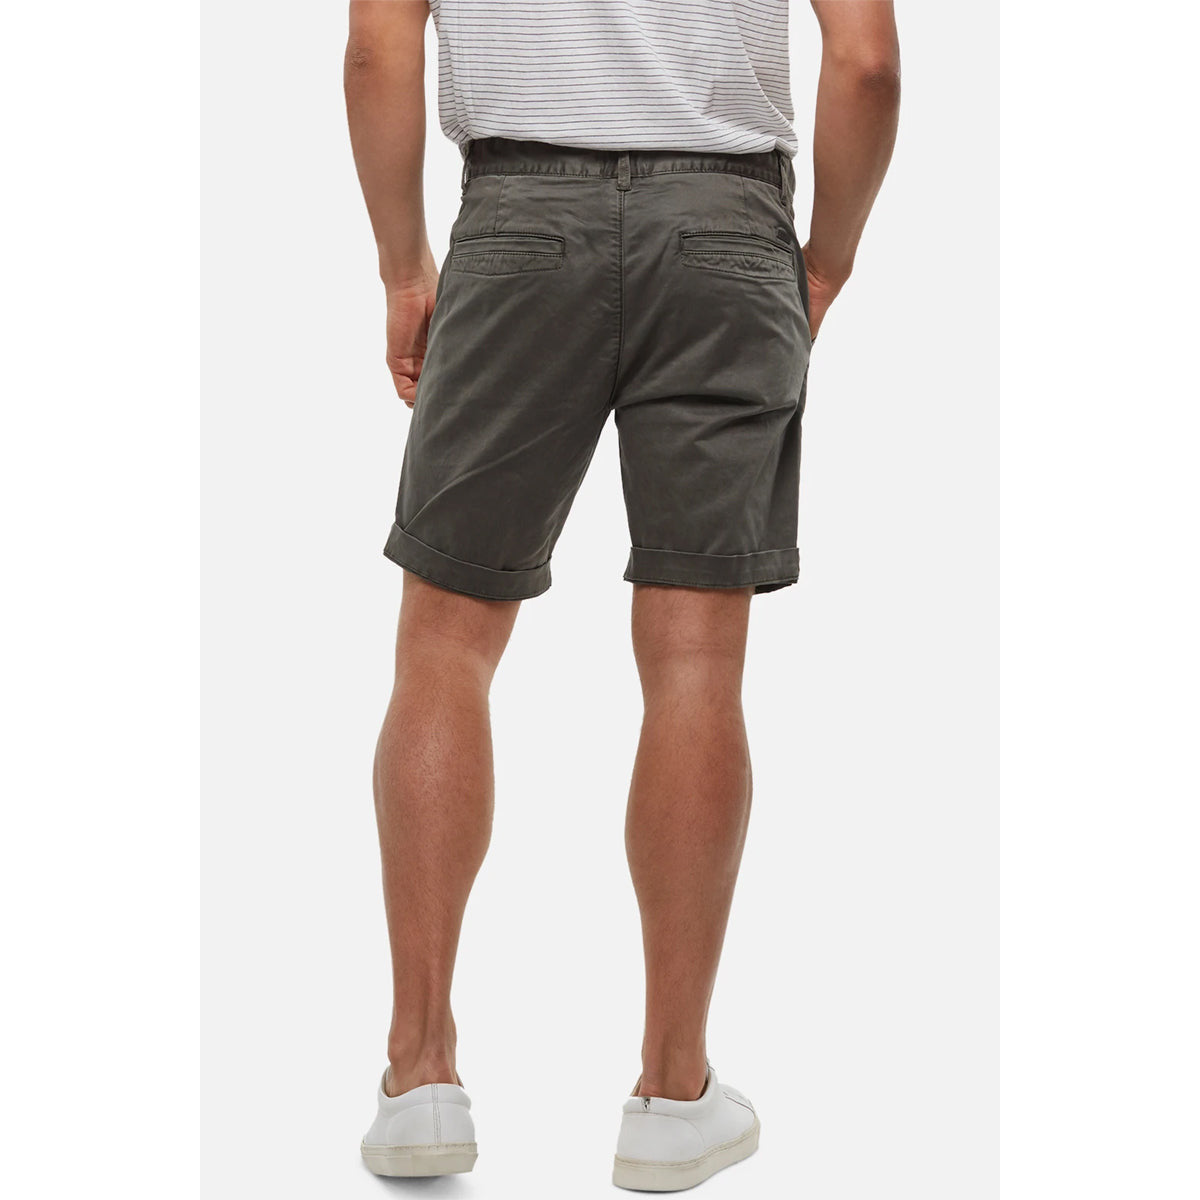 The Washed Cuba Short